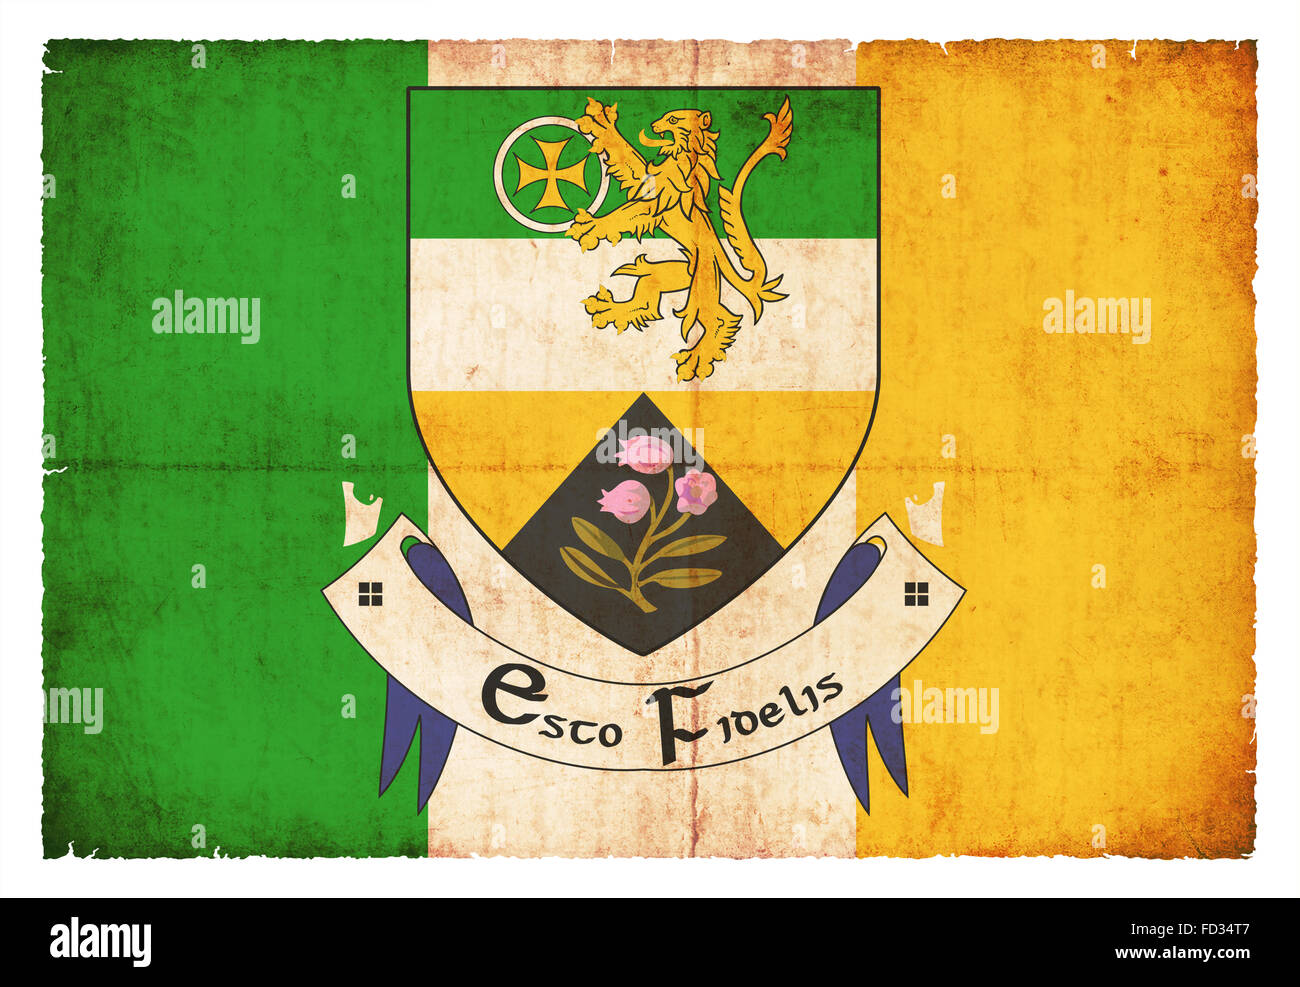 Flag of the Irish county Offaly created in grunge style Stock Photo